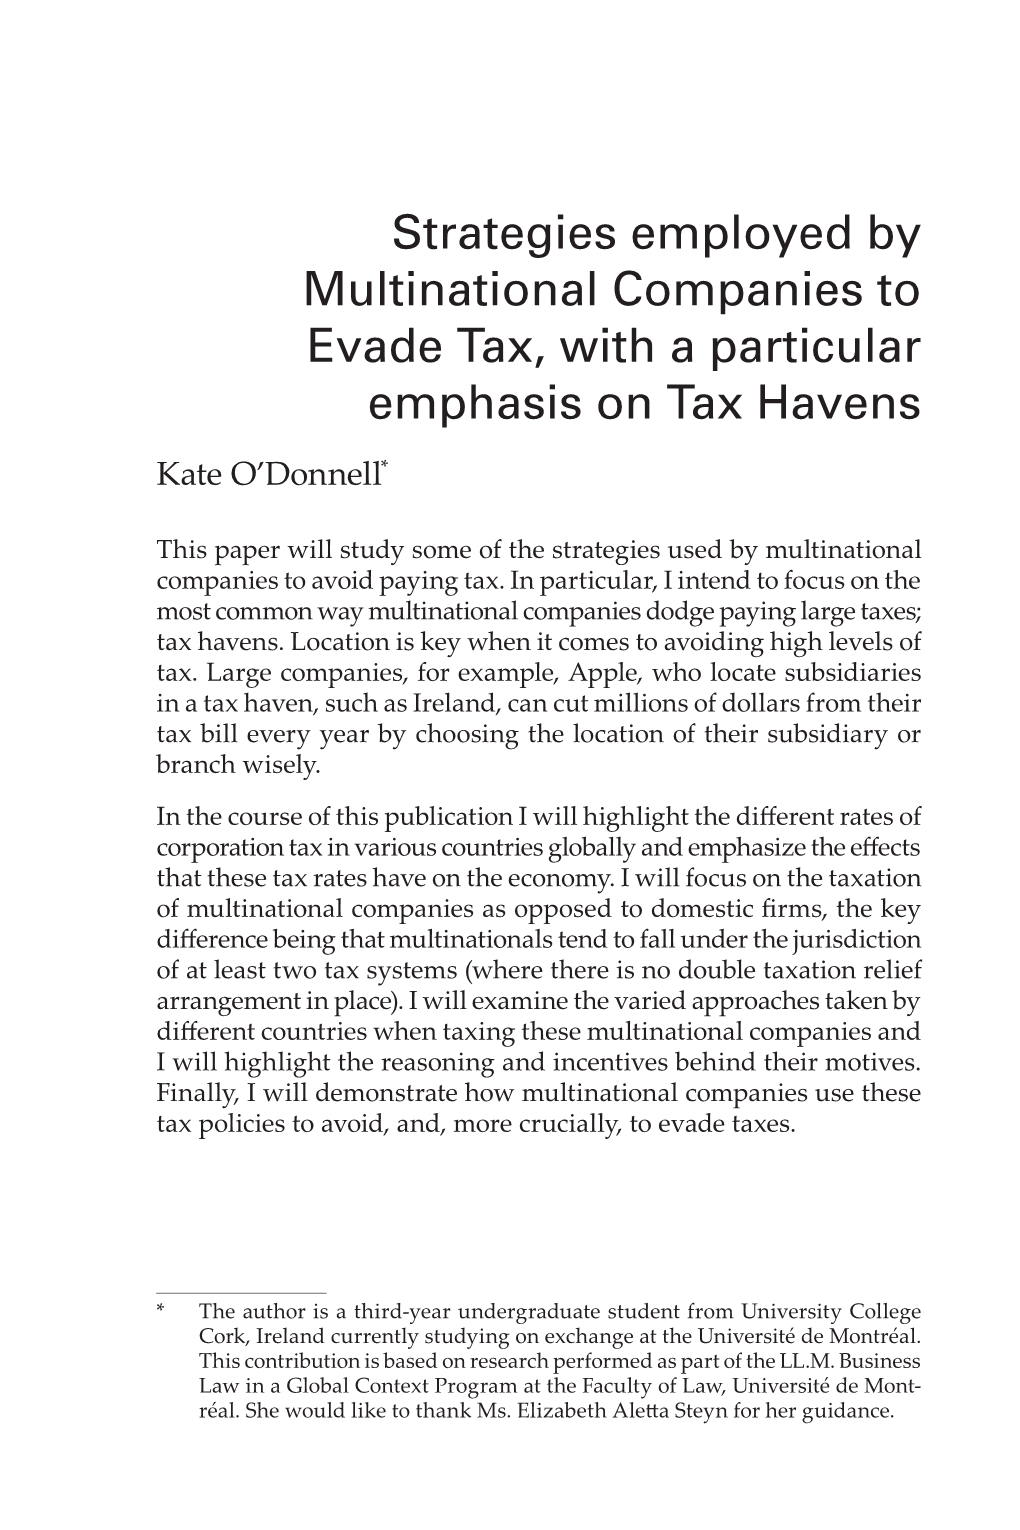 Strategies Employed by Multinational Companies to Evade Tax, with a Particular Emphasis on Tax Havens Kate O’Donnell*